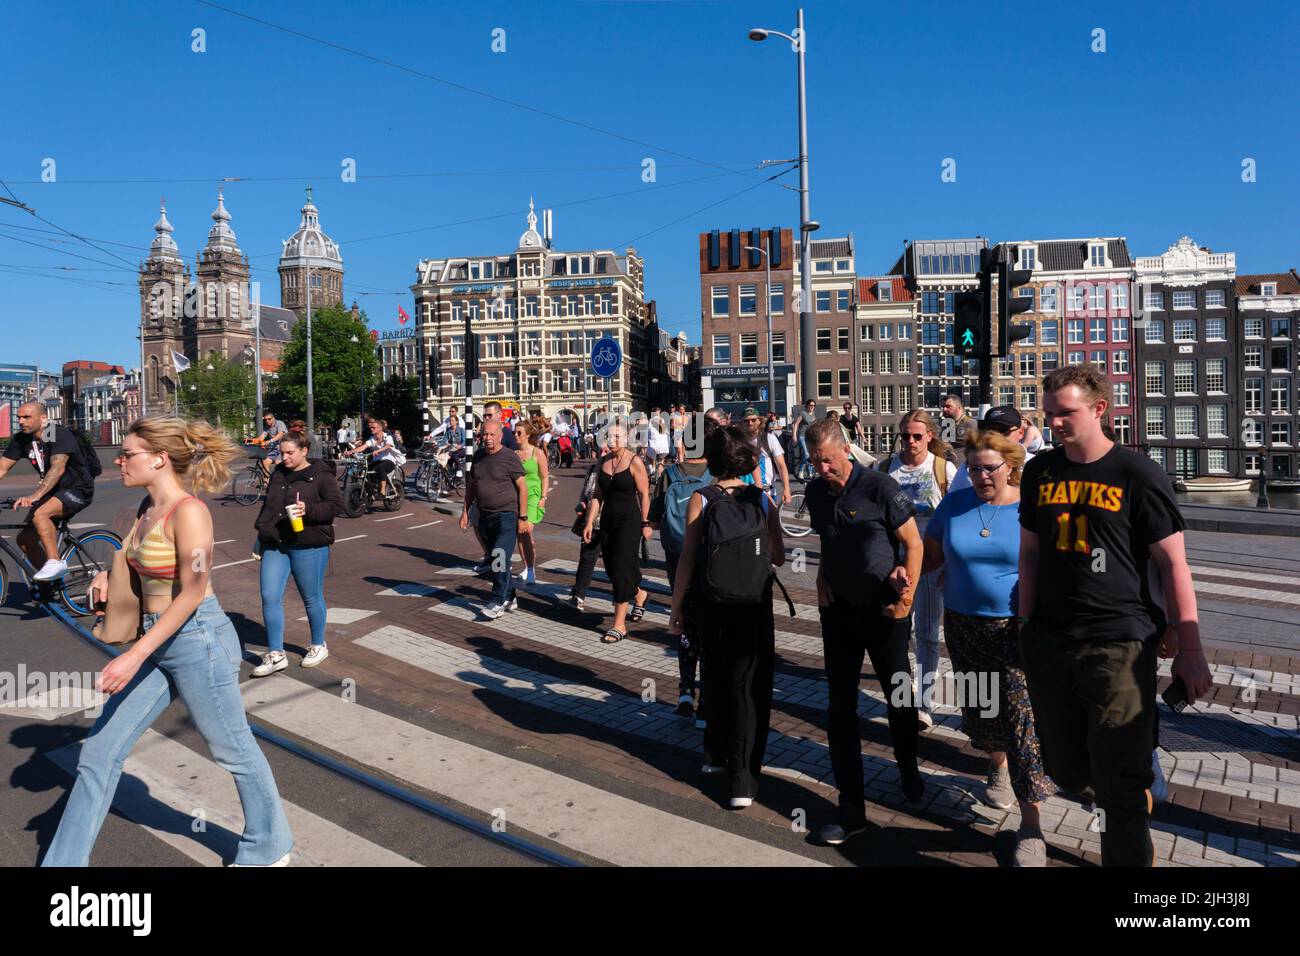 Amsterdam, Netherlands - 22 June 2022: Many people crossing the street in Amsterdam Stock Photo